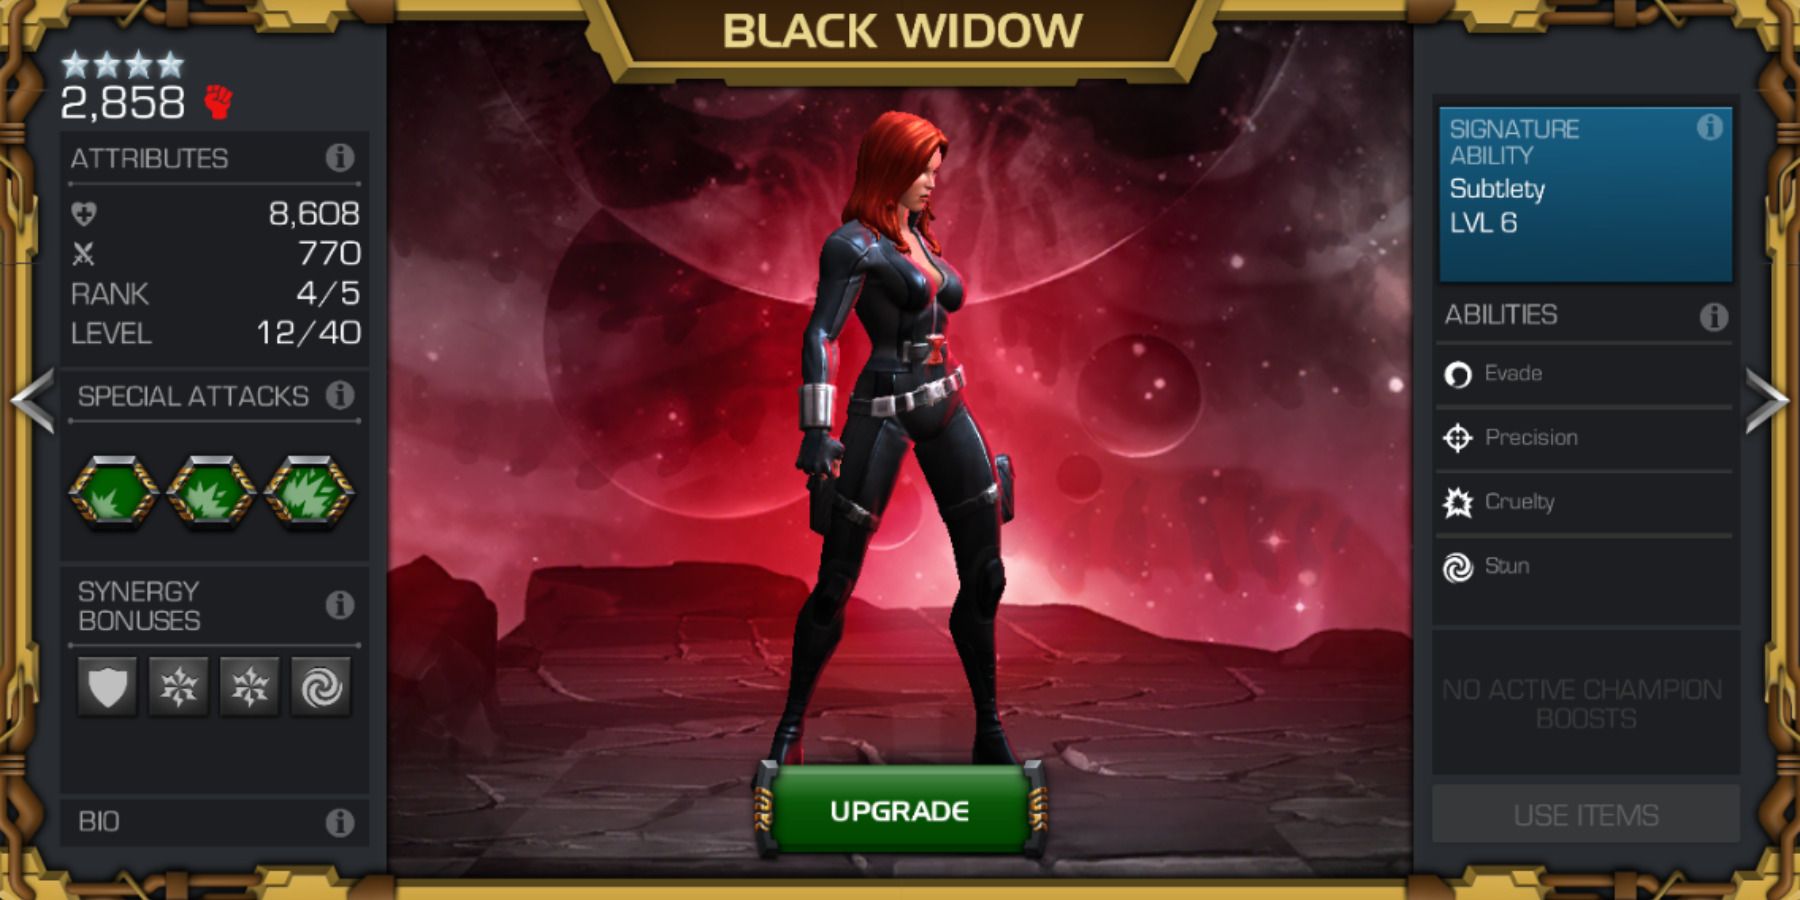  Black Widow in Marvel Contest of Champions.